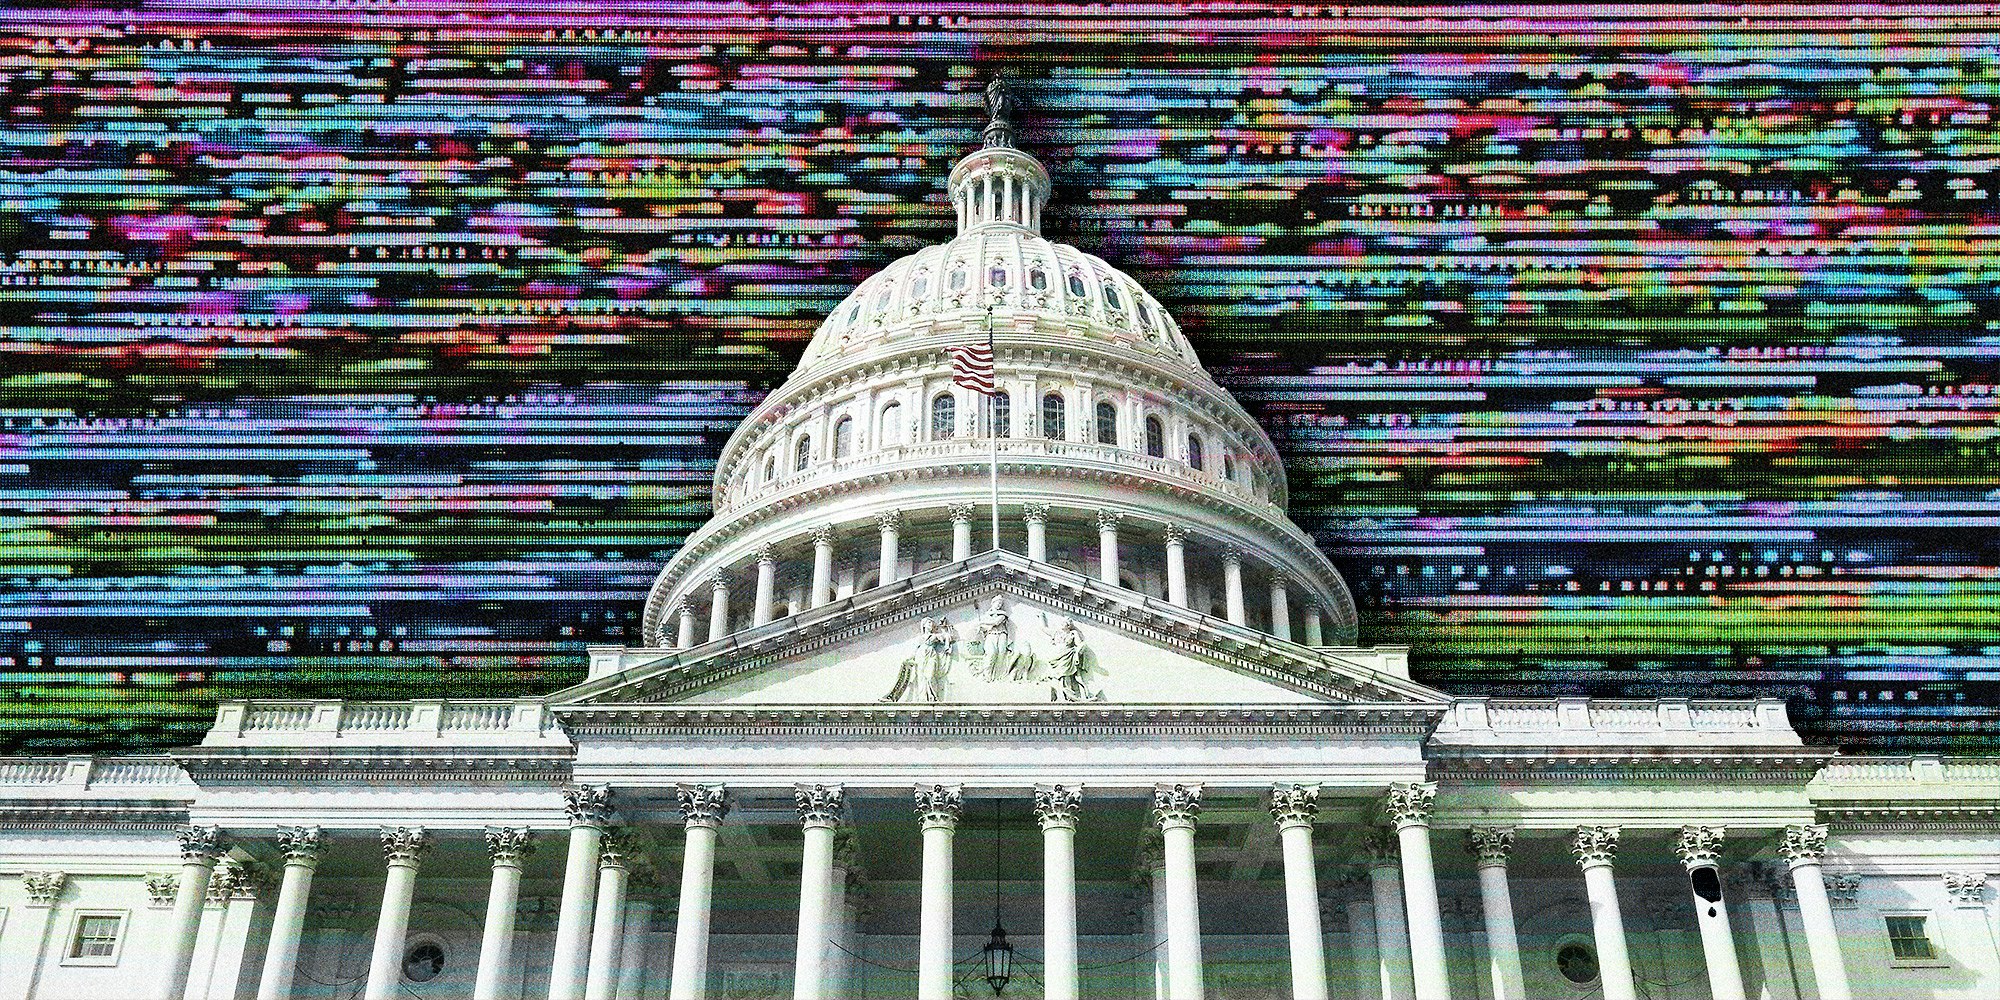 The United States Capitol building superimposed on a digital field.